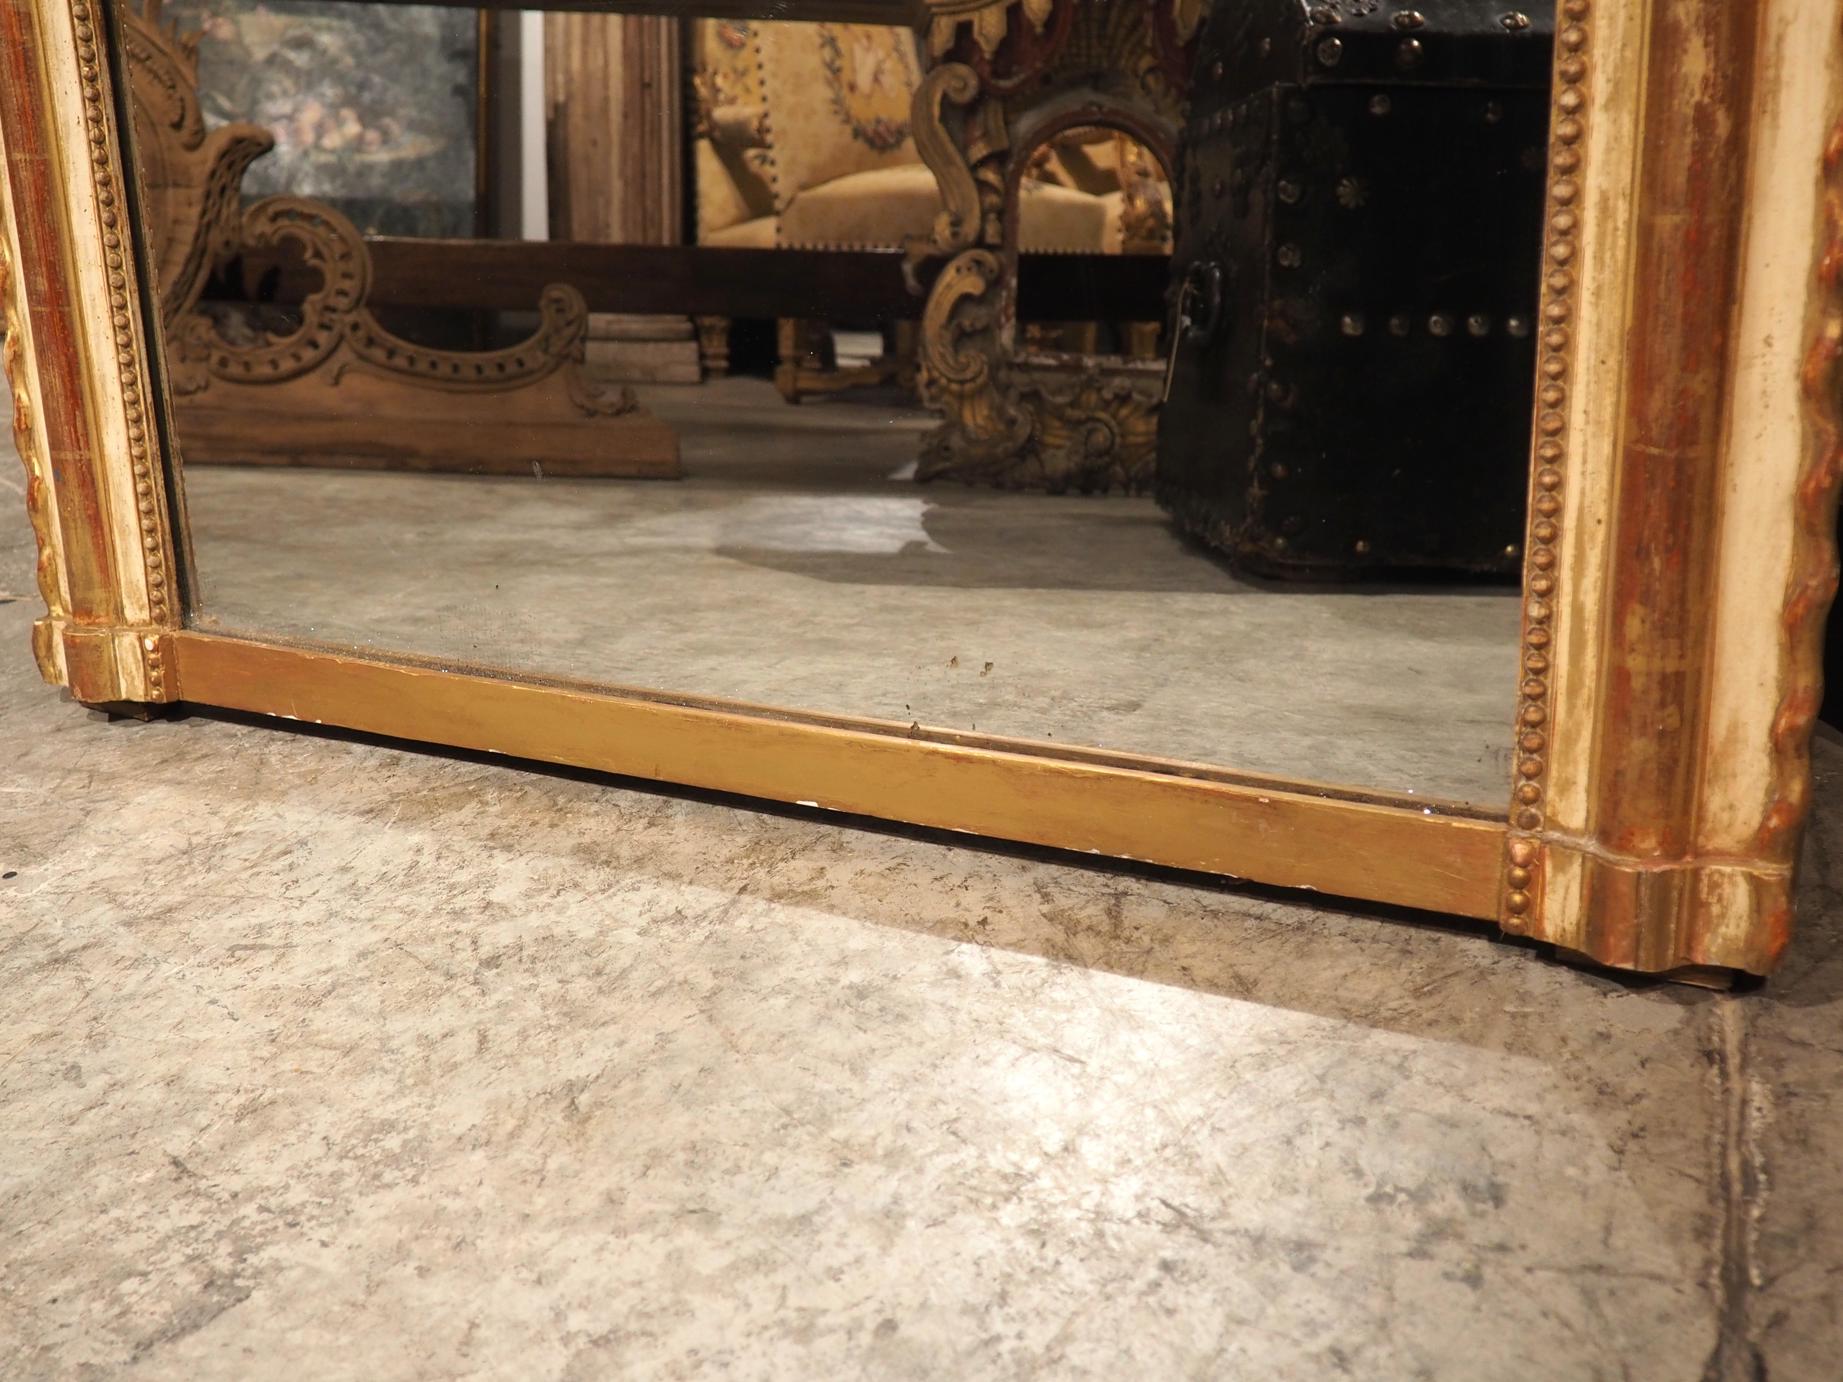 French 19th Century Large Louis Philippe Gold Gilt Mirror